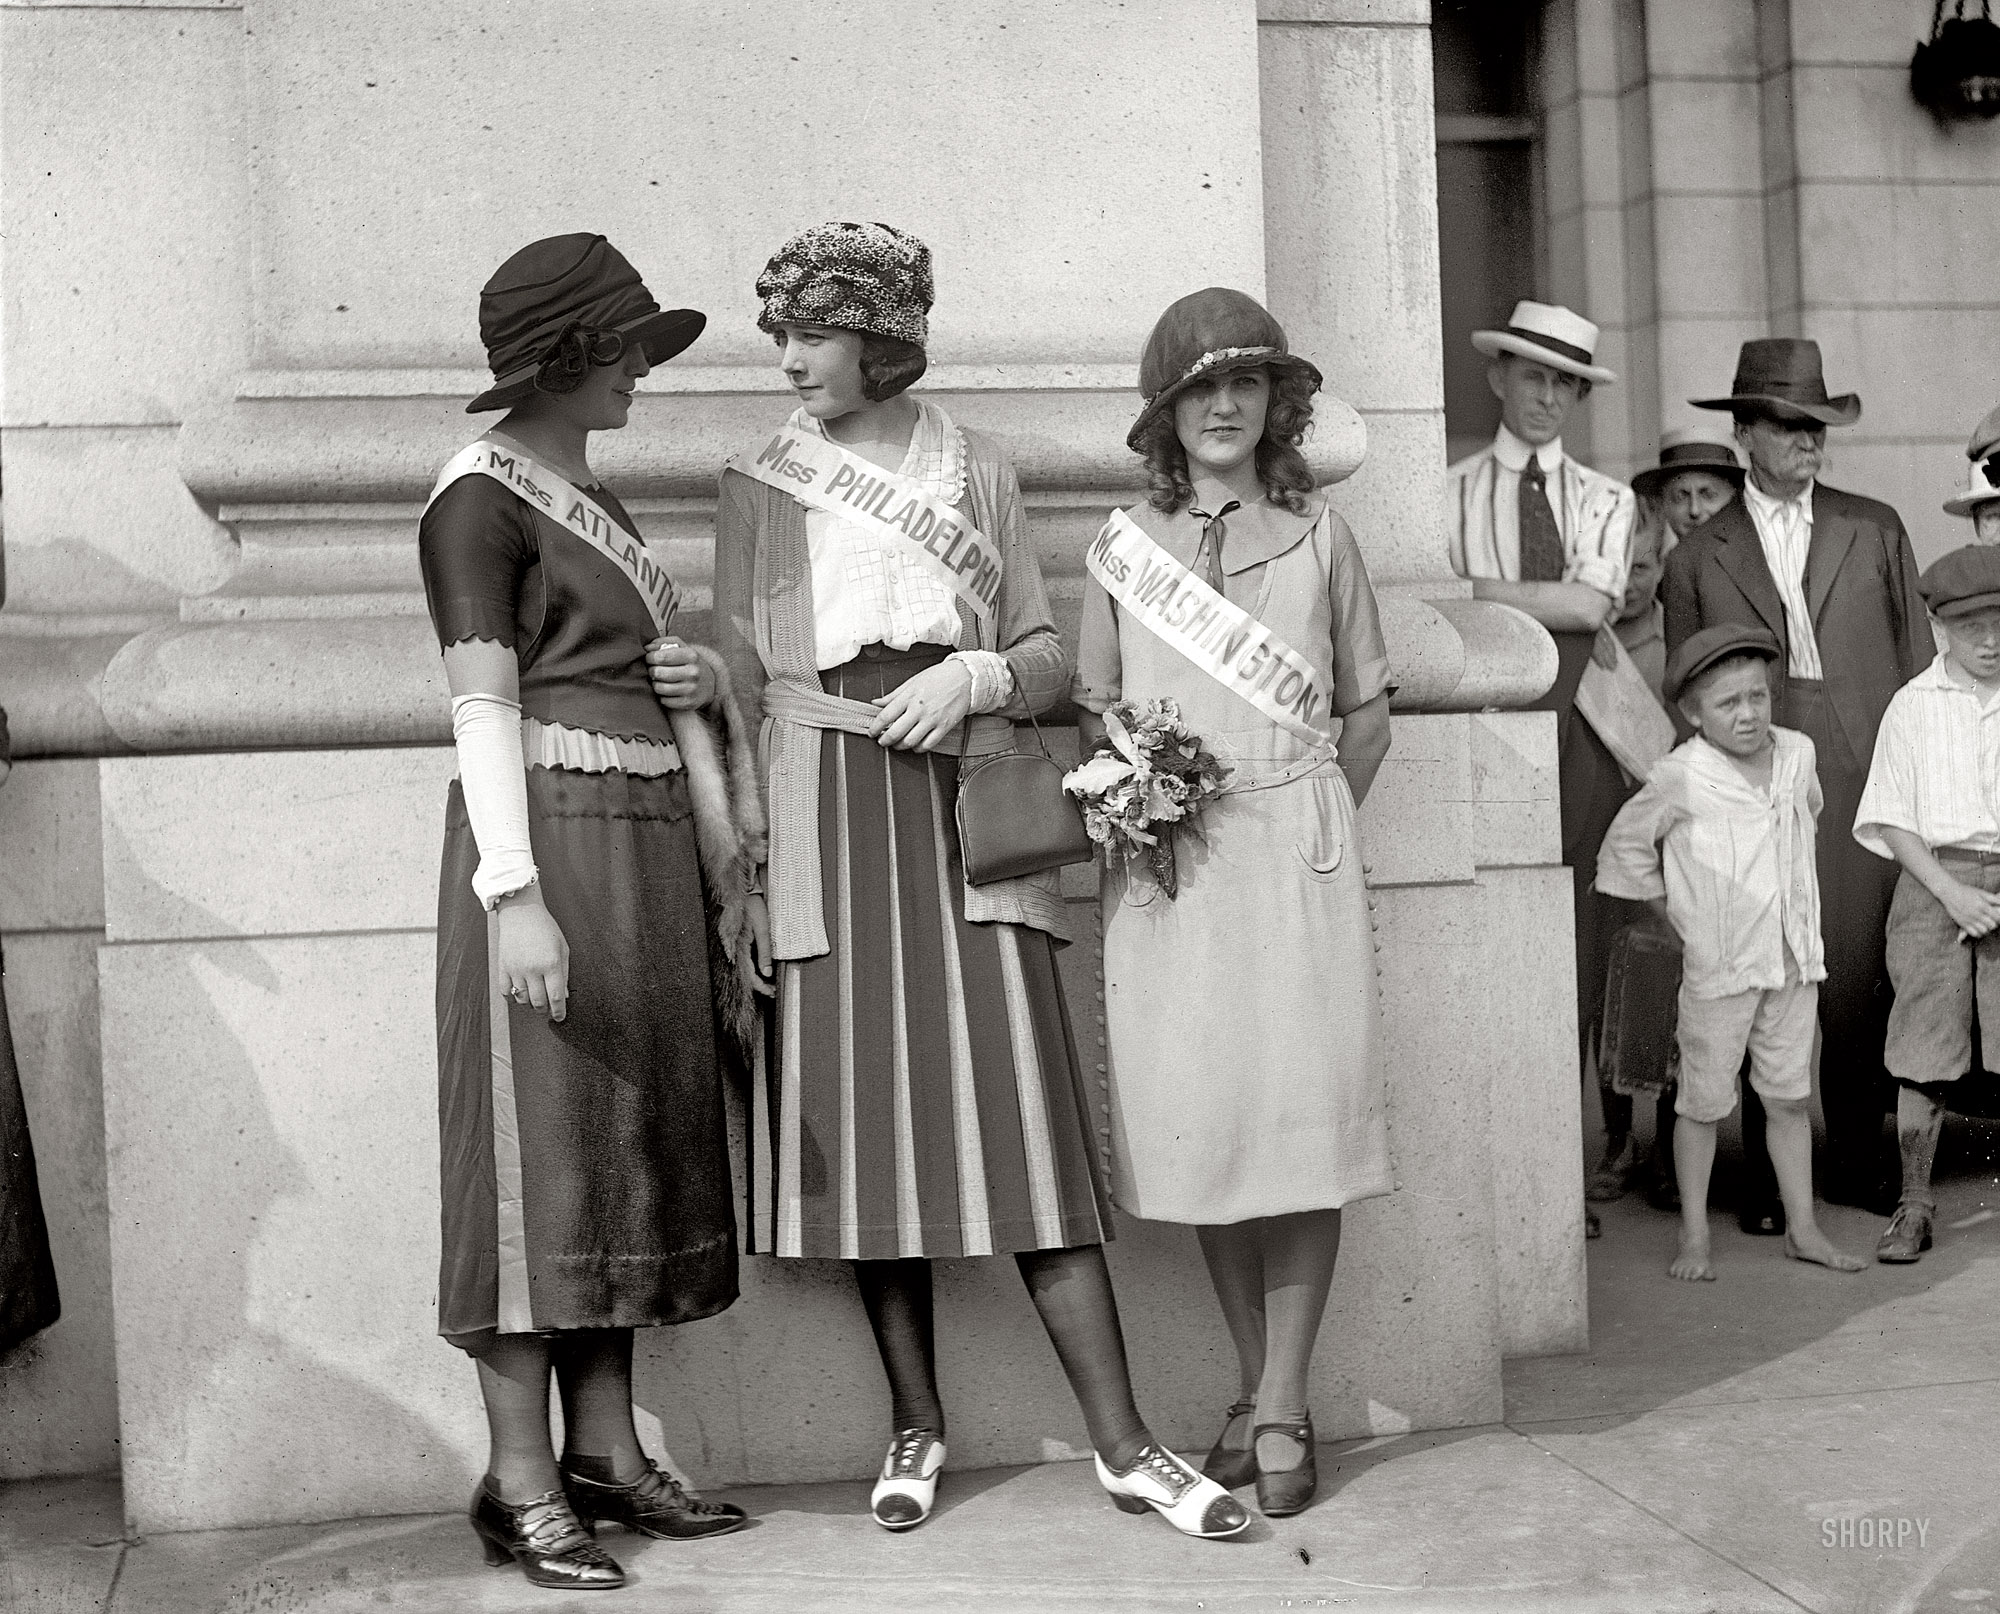 1921. Inter-City Beauties Ethel Charles, Nellie Orr and Margaret Gorman at Union Station in Washington, D.C. Margaret would be crowned winner at the very first Miss America pageant. National Photo Company glass negative. View full size.